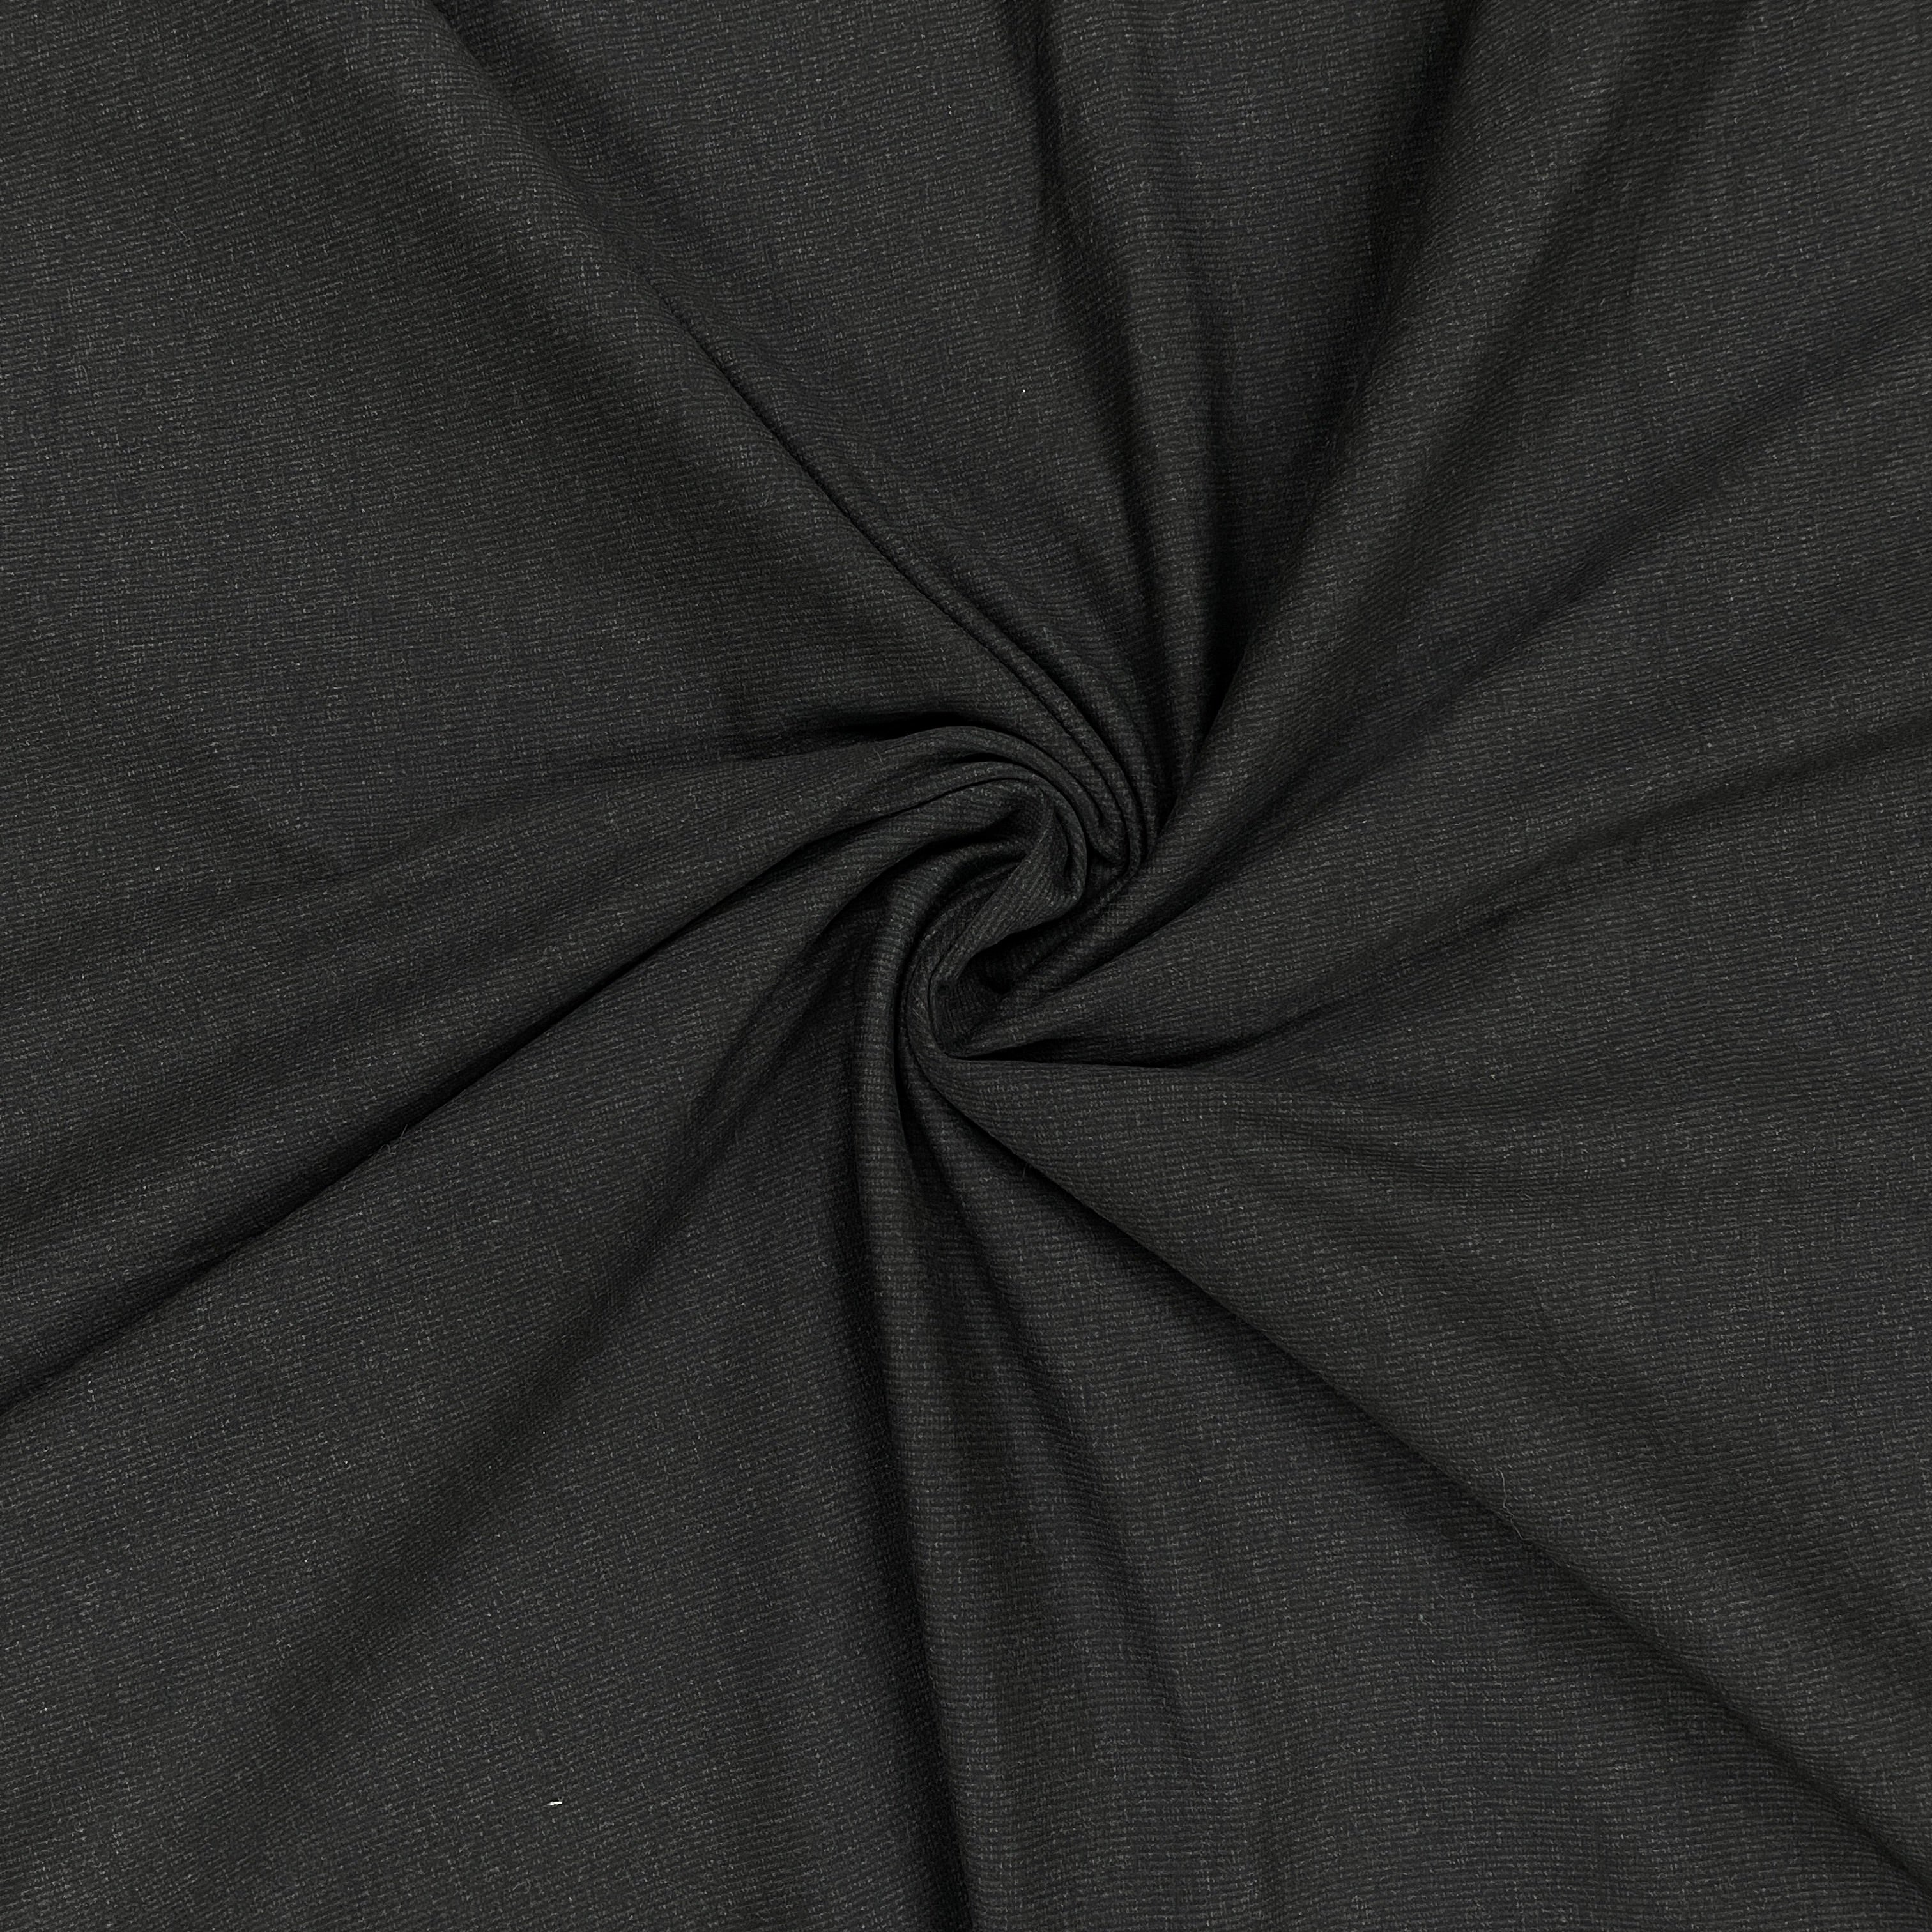 Charcoal/Black Shadow Stripe Suiting Fabric